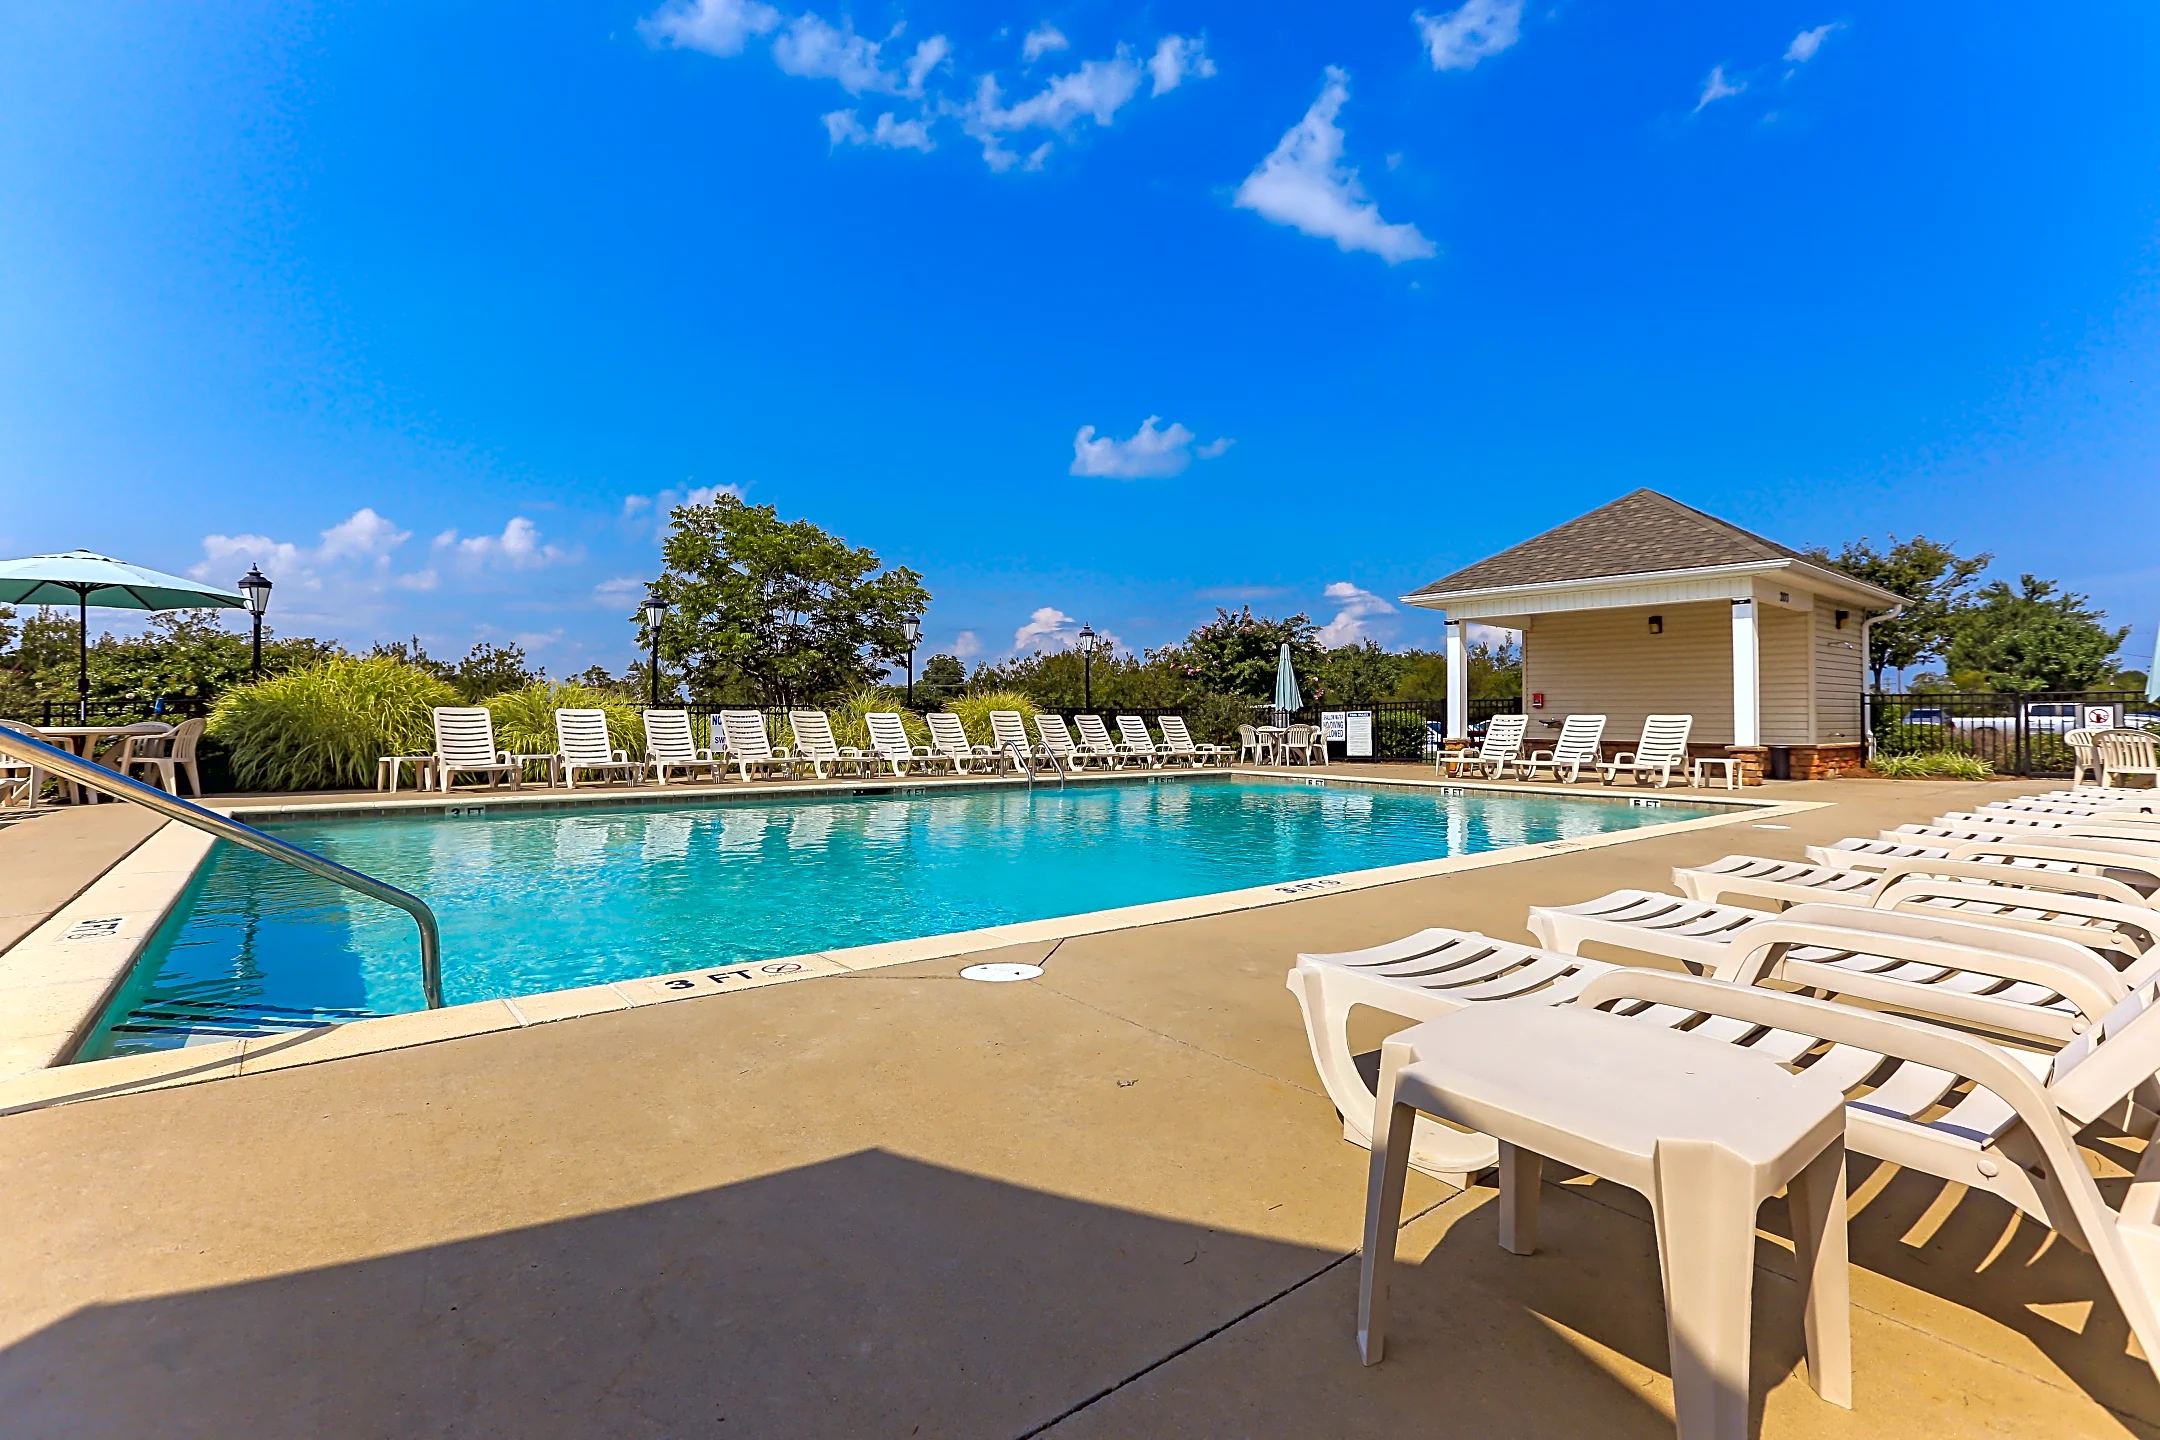 Pool - The Preserve At West View - Greer, SC